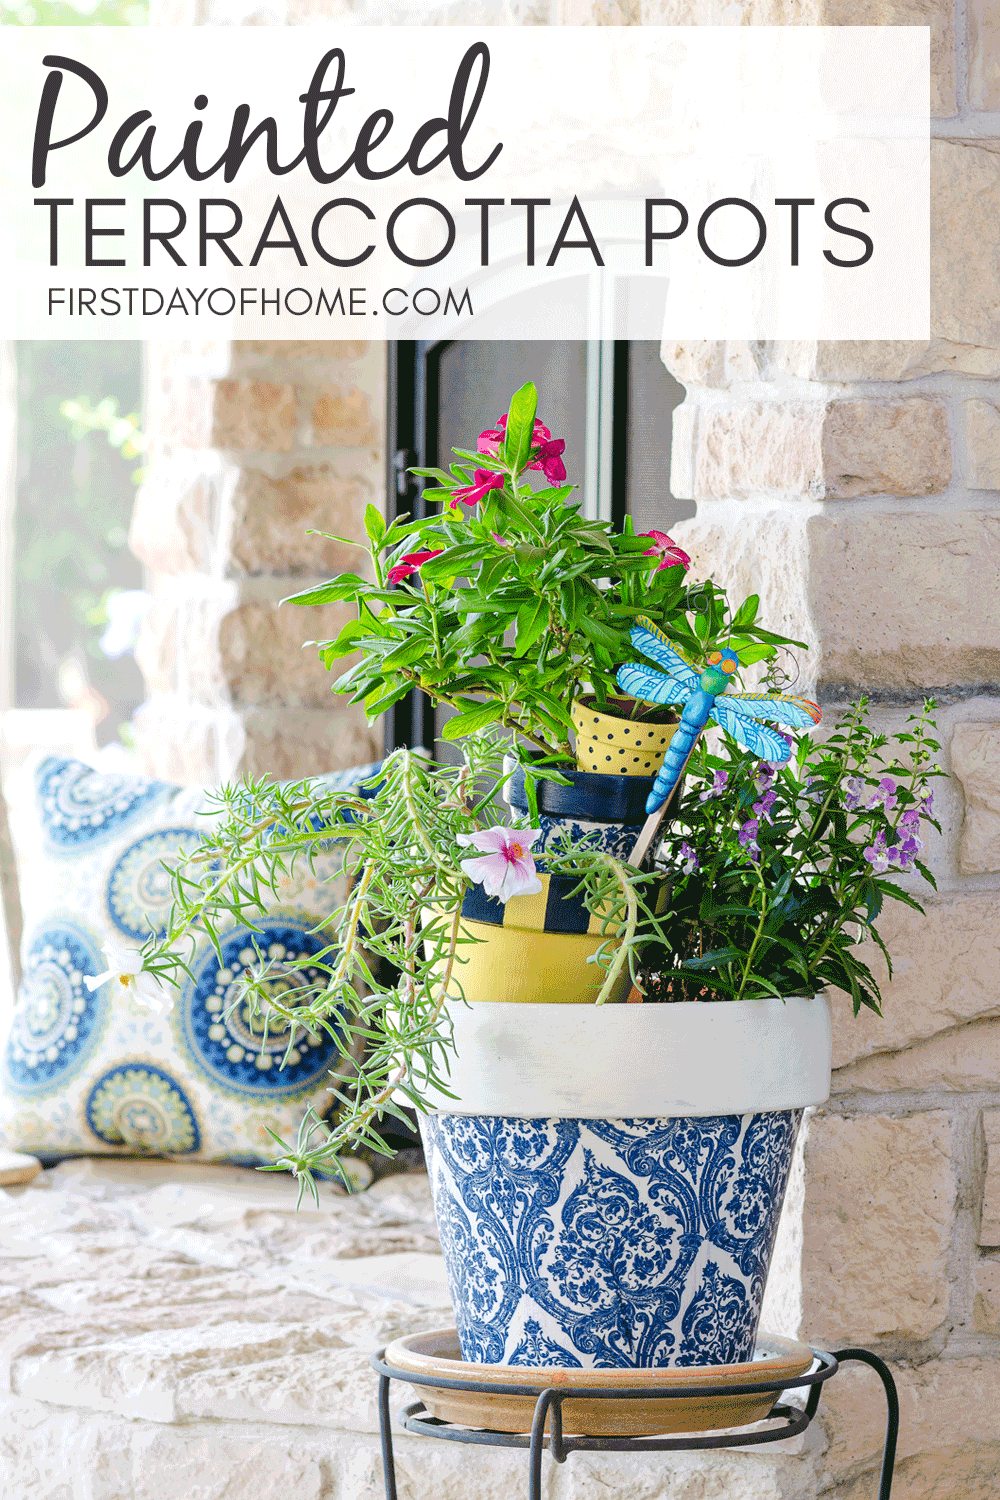 Painting Terracotta Pots Like The Pros, How To Paint Outdoor Ceramic Plant Pots